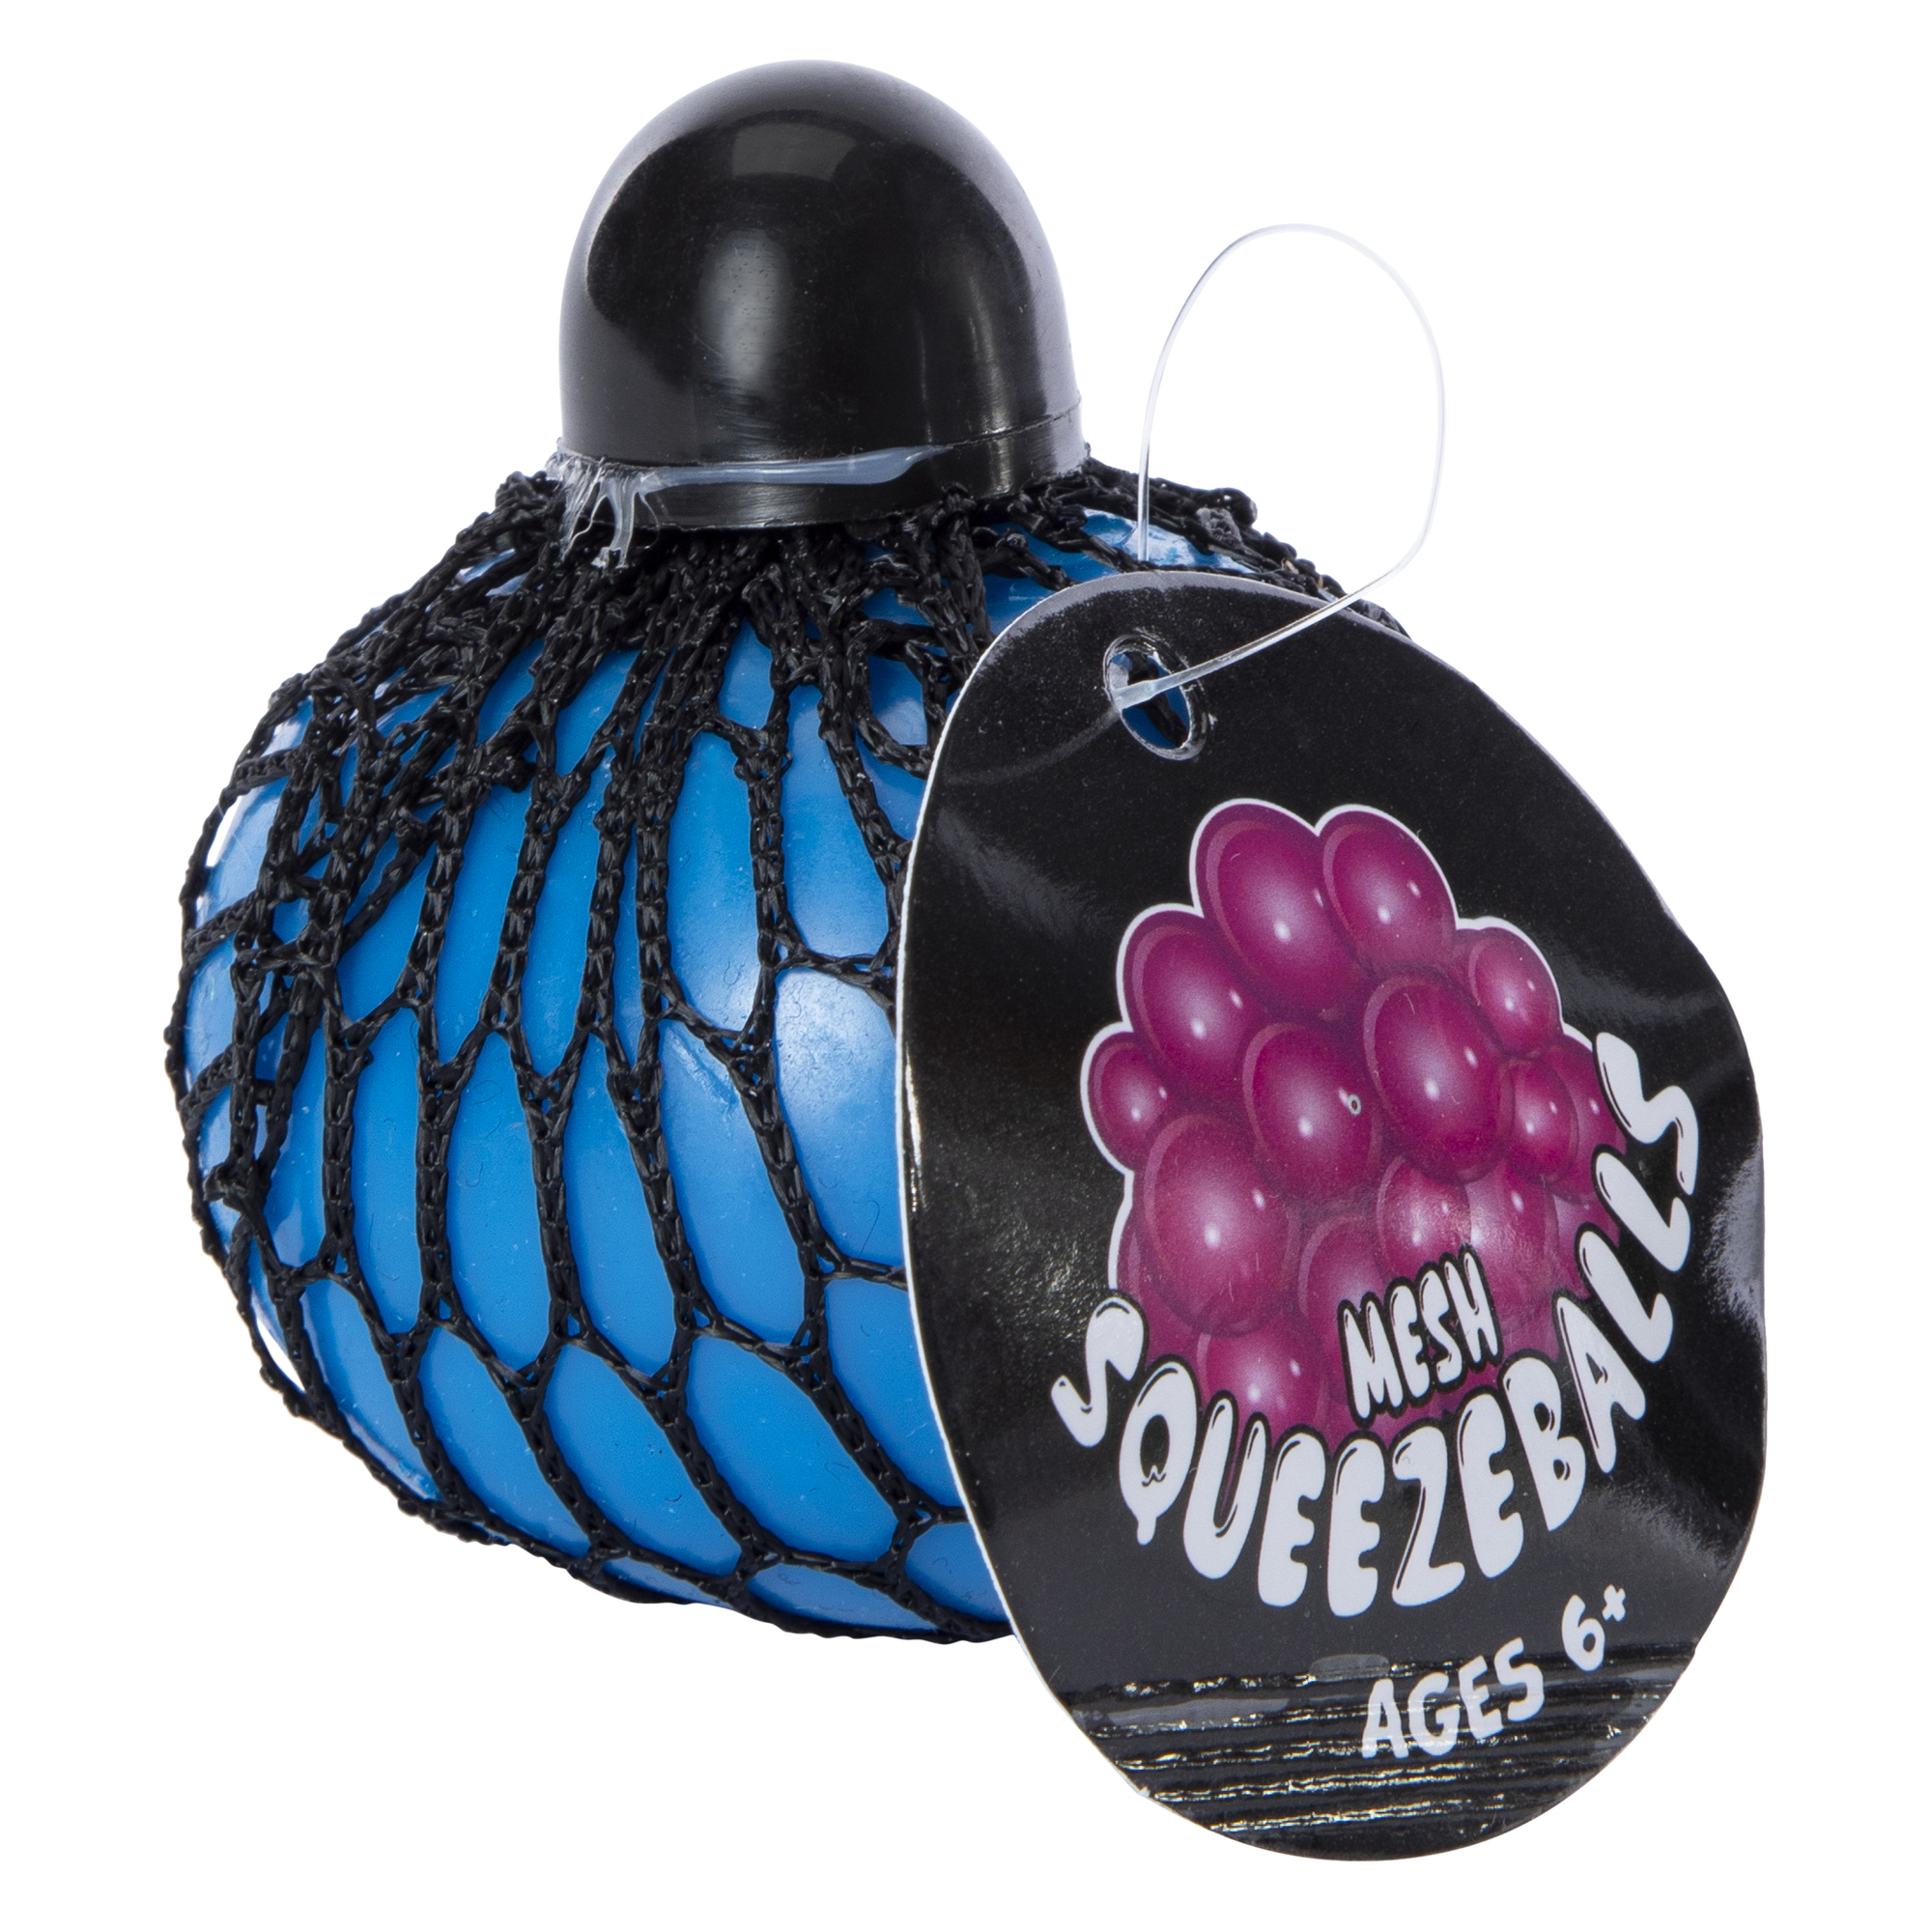 mesh squeeze ball